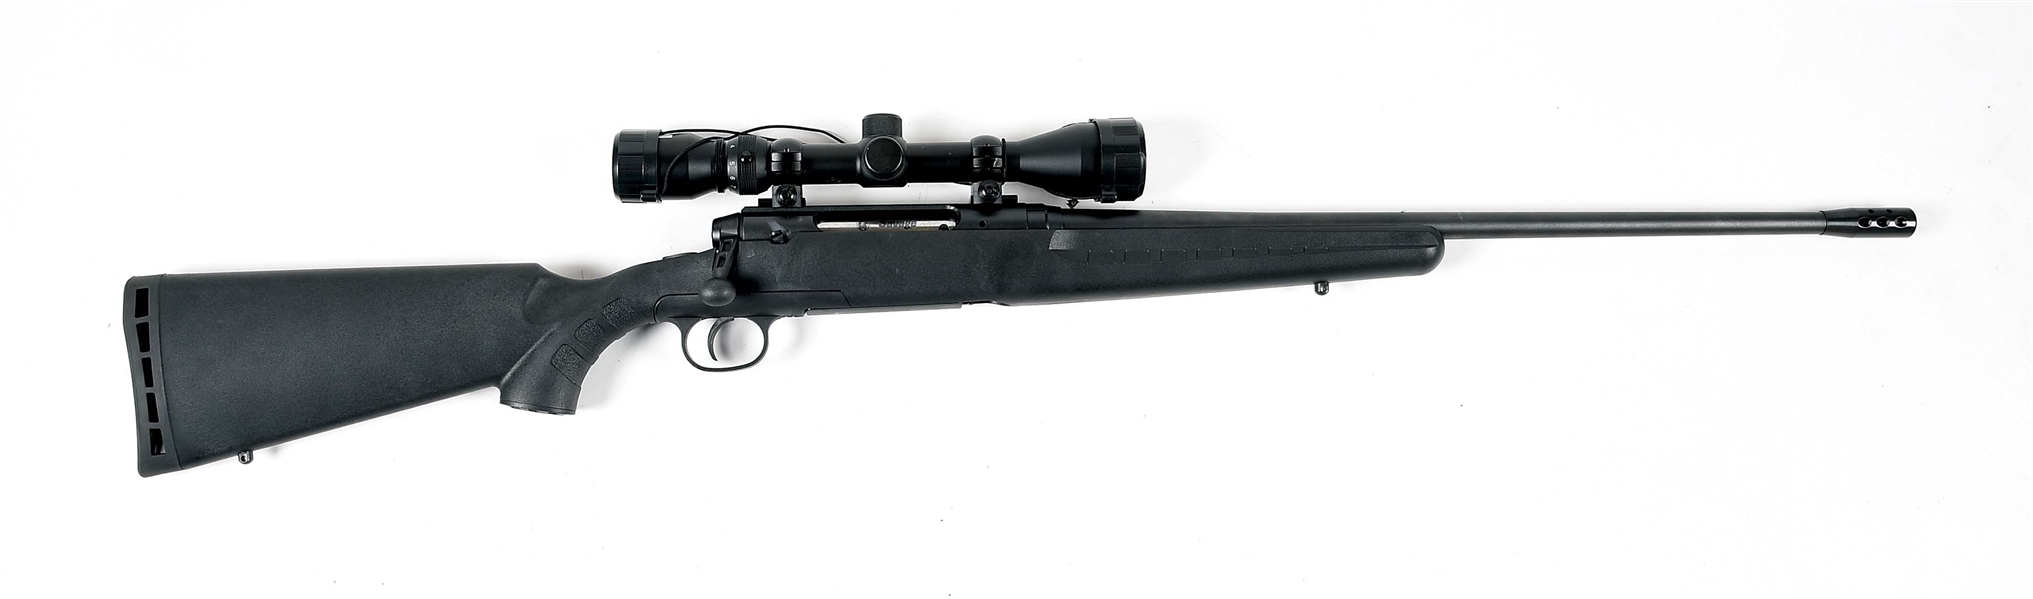 (M) SAVAGE AXIS BOLT ACTION RIFLE. 